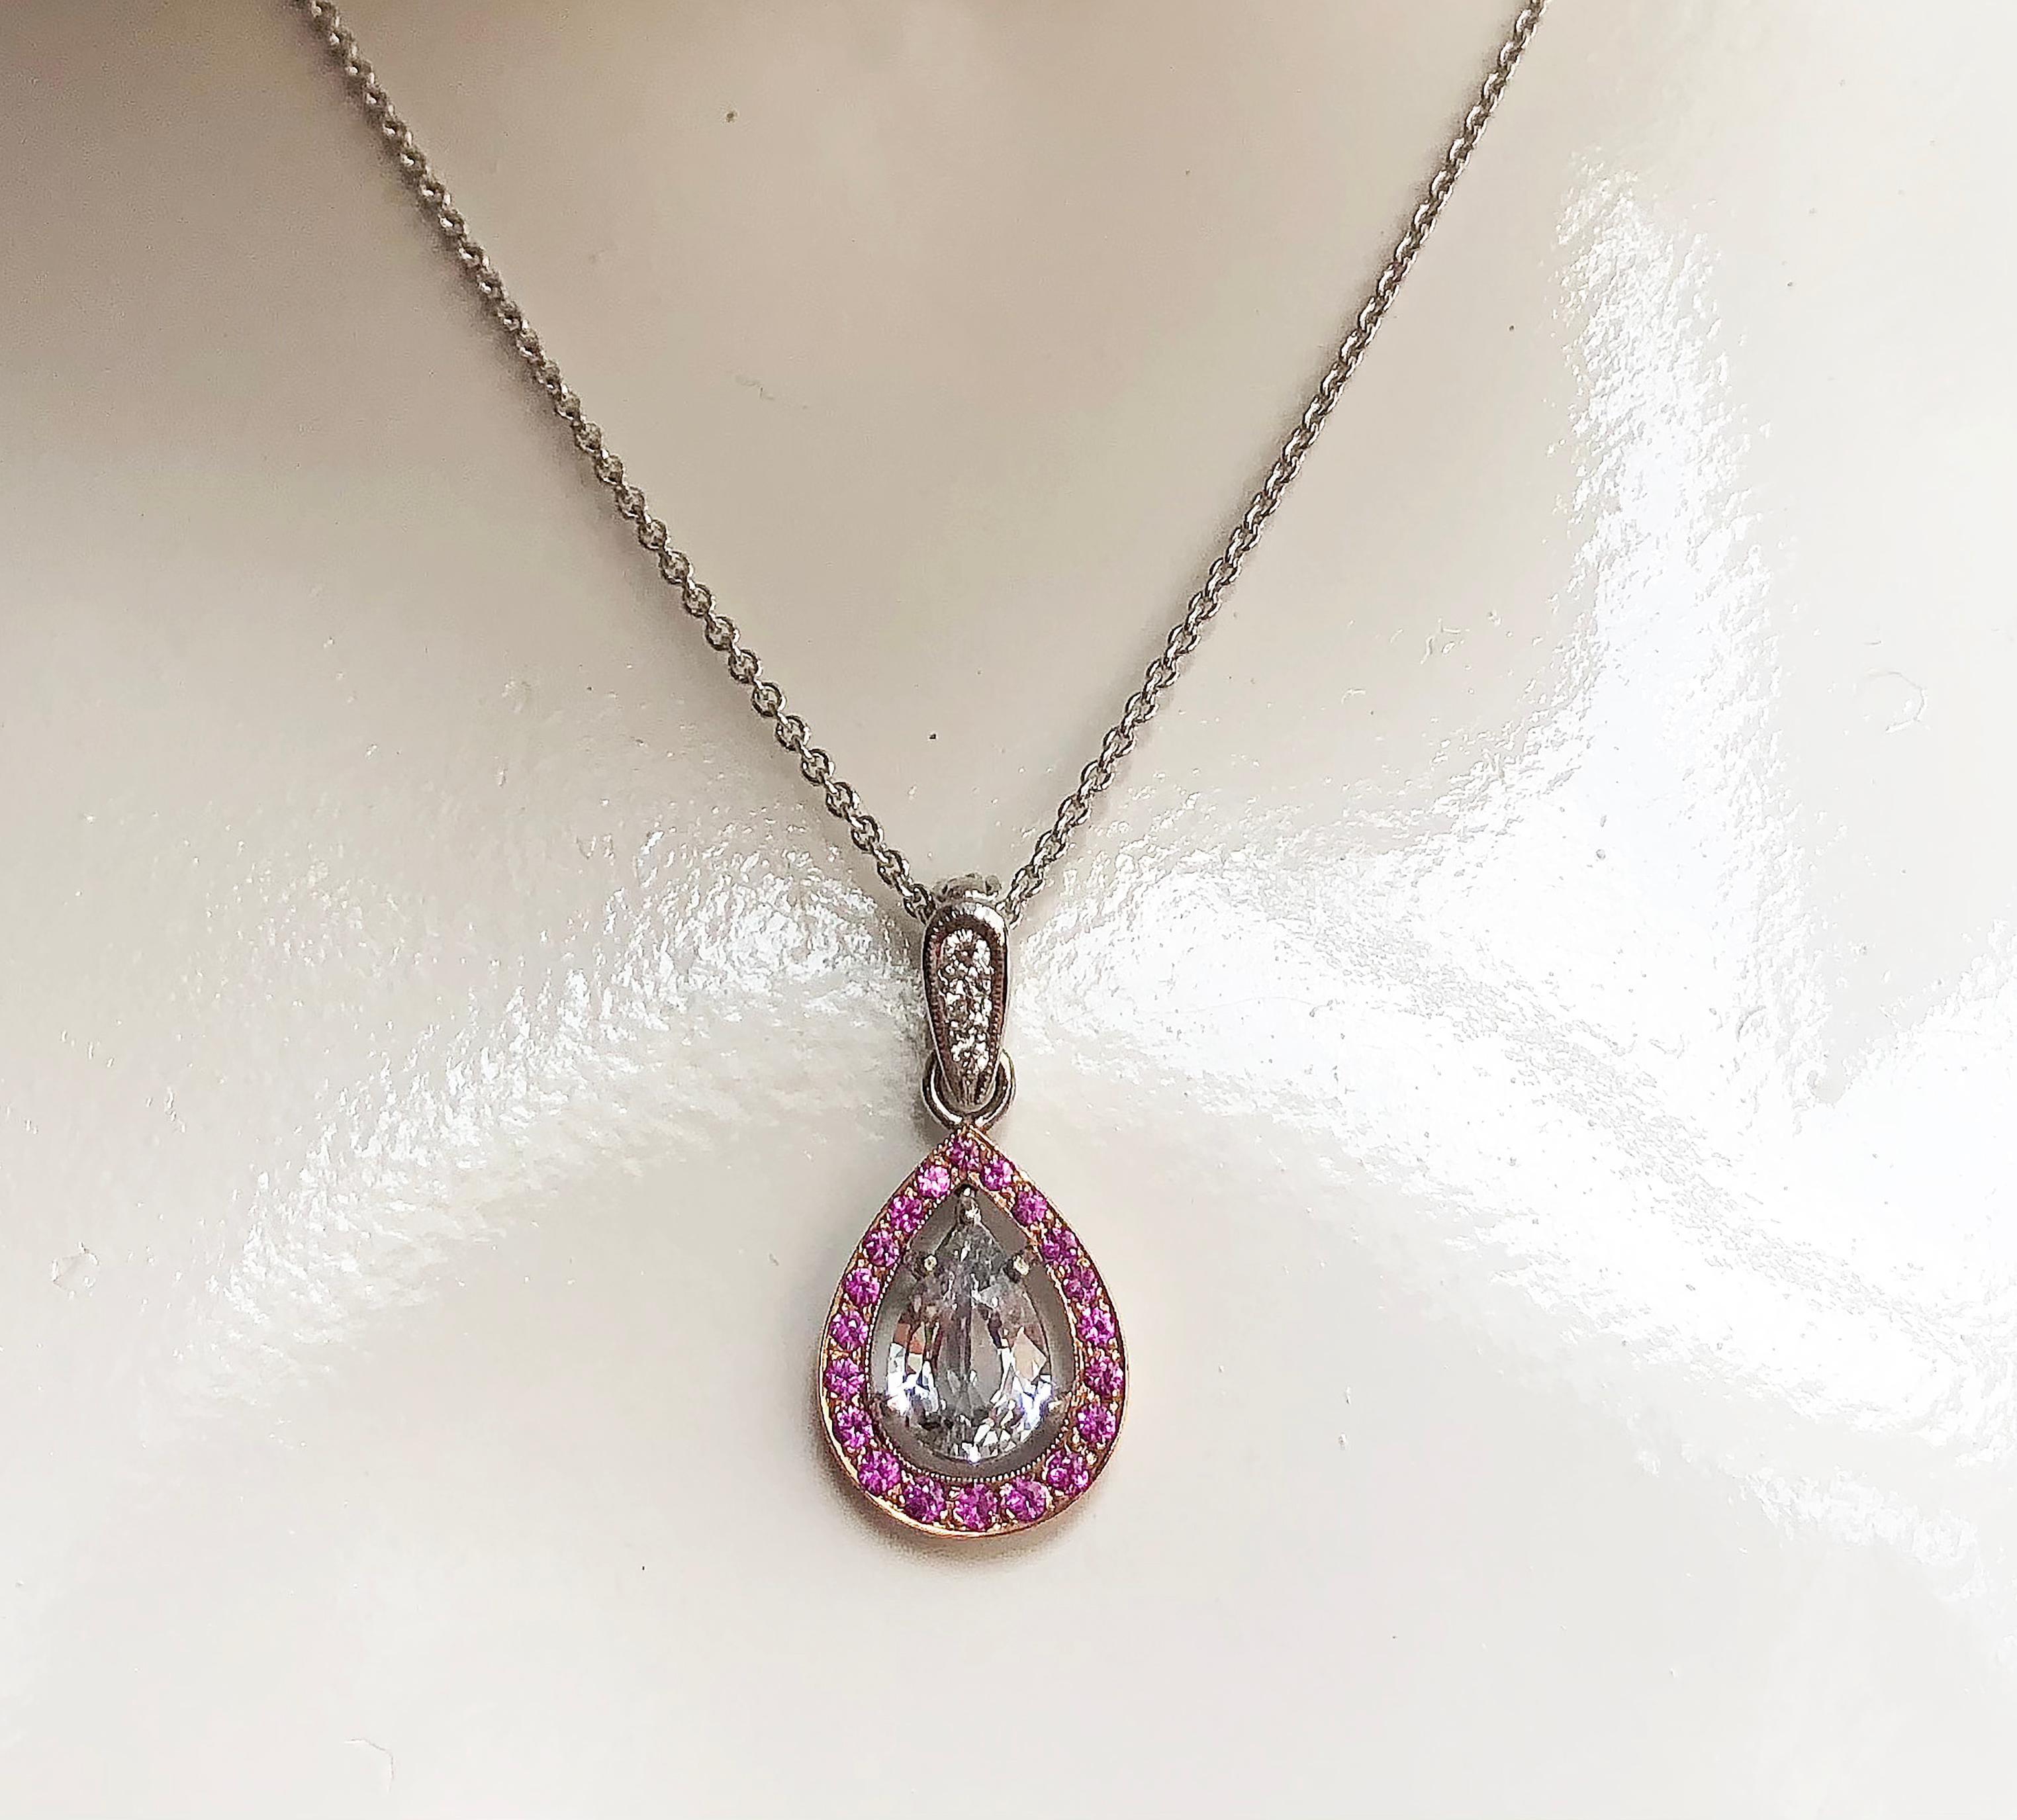 White Sapphire 1.58 carats with Pink Sapphire 0.40 carat and Diamond 0.07 carat Pendant set in 18 Karat White Gold Settings
(chain not included)

Width: 1.2 cm
Length: 2.6 cm 

